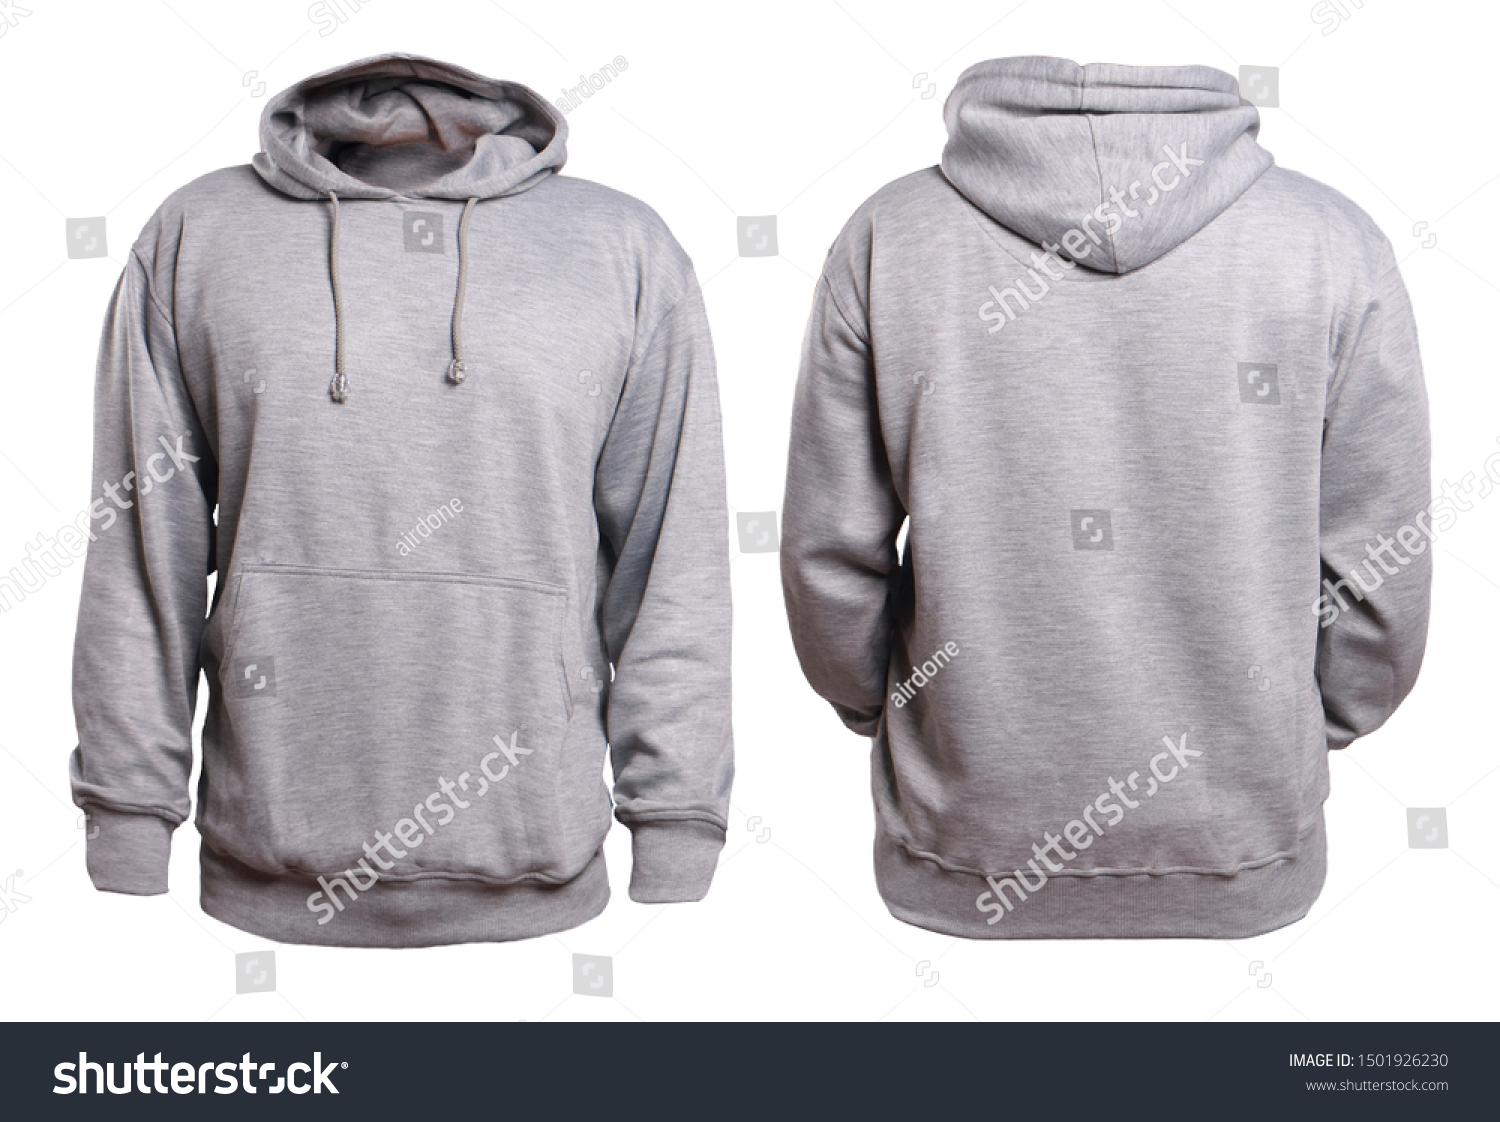 Blank sweatshirt mock up, front, and back view, isolated on white. Plain gray hoodie mockup. Hoody design presentation. Jumper for print. Blank clothes sweat shirt sweater #1501926230